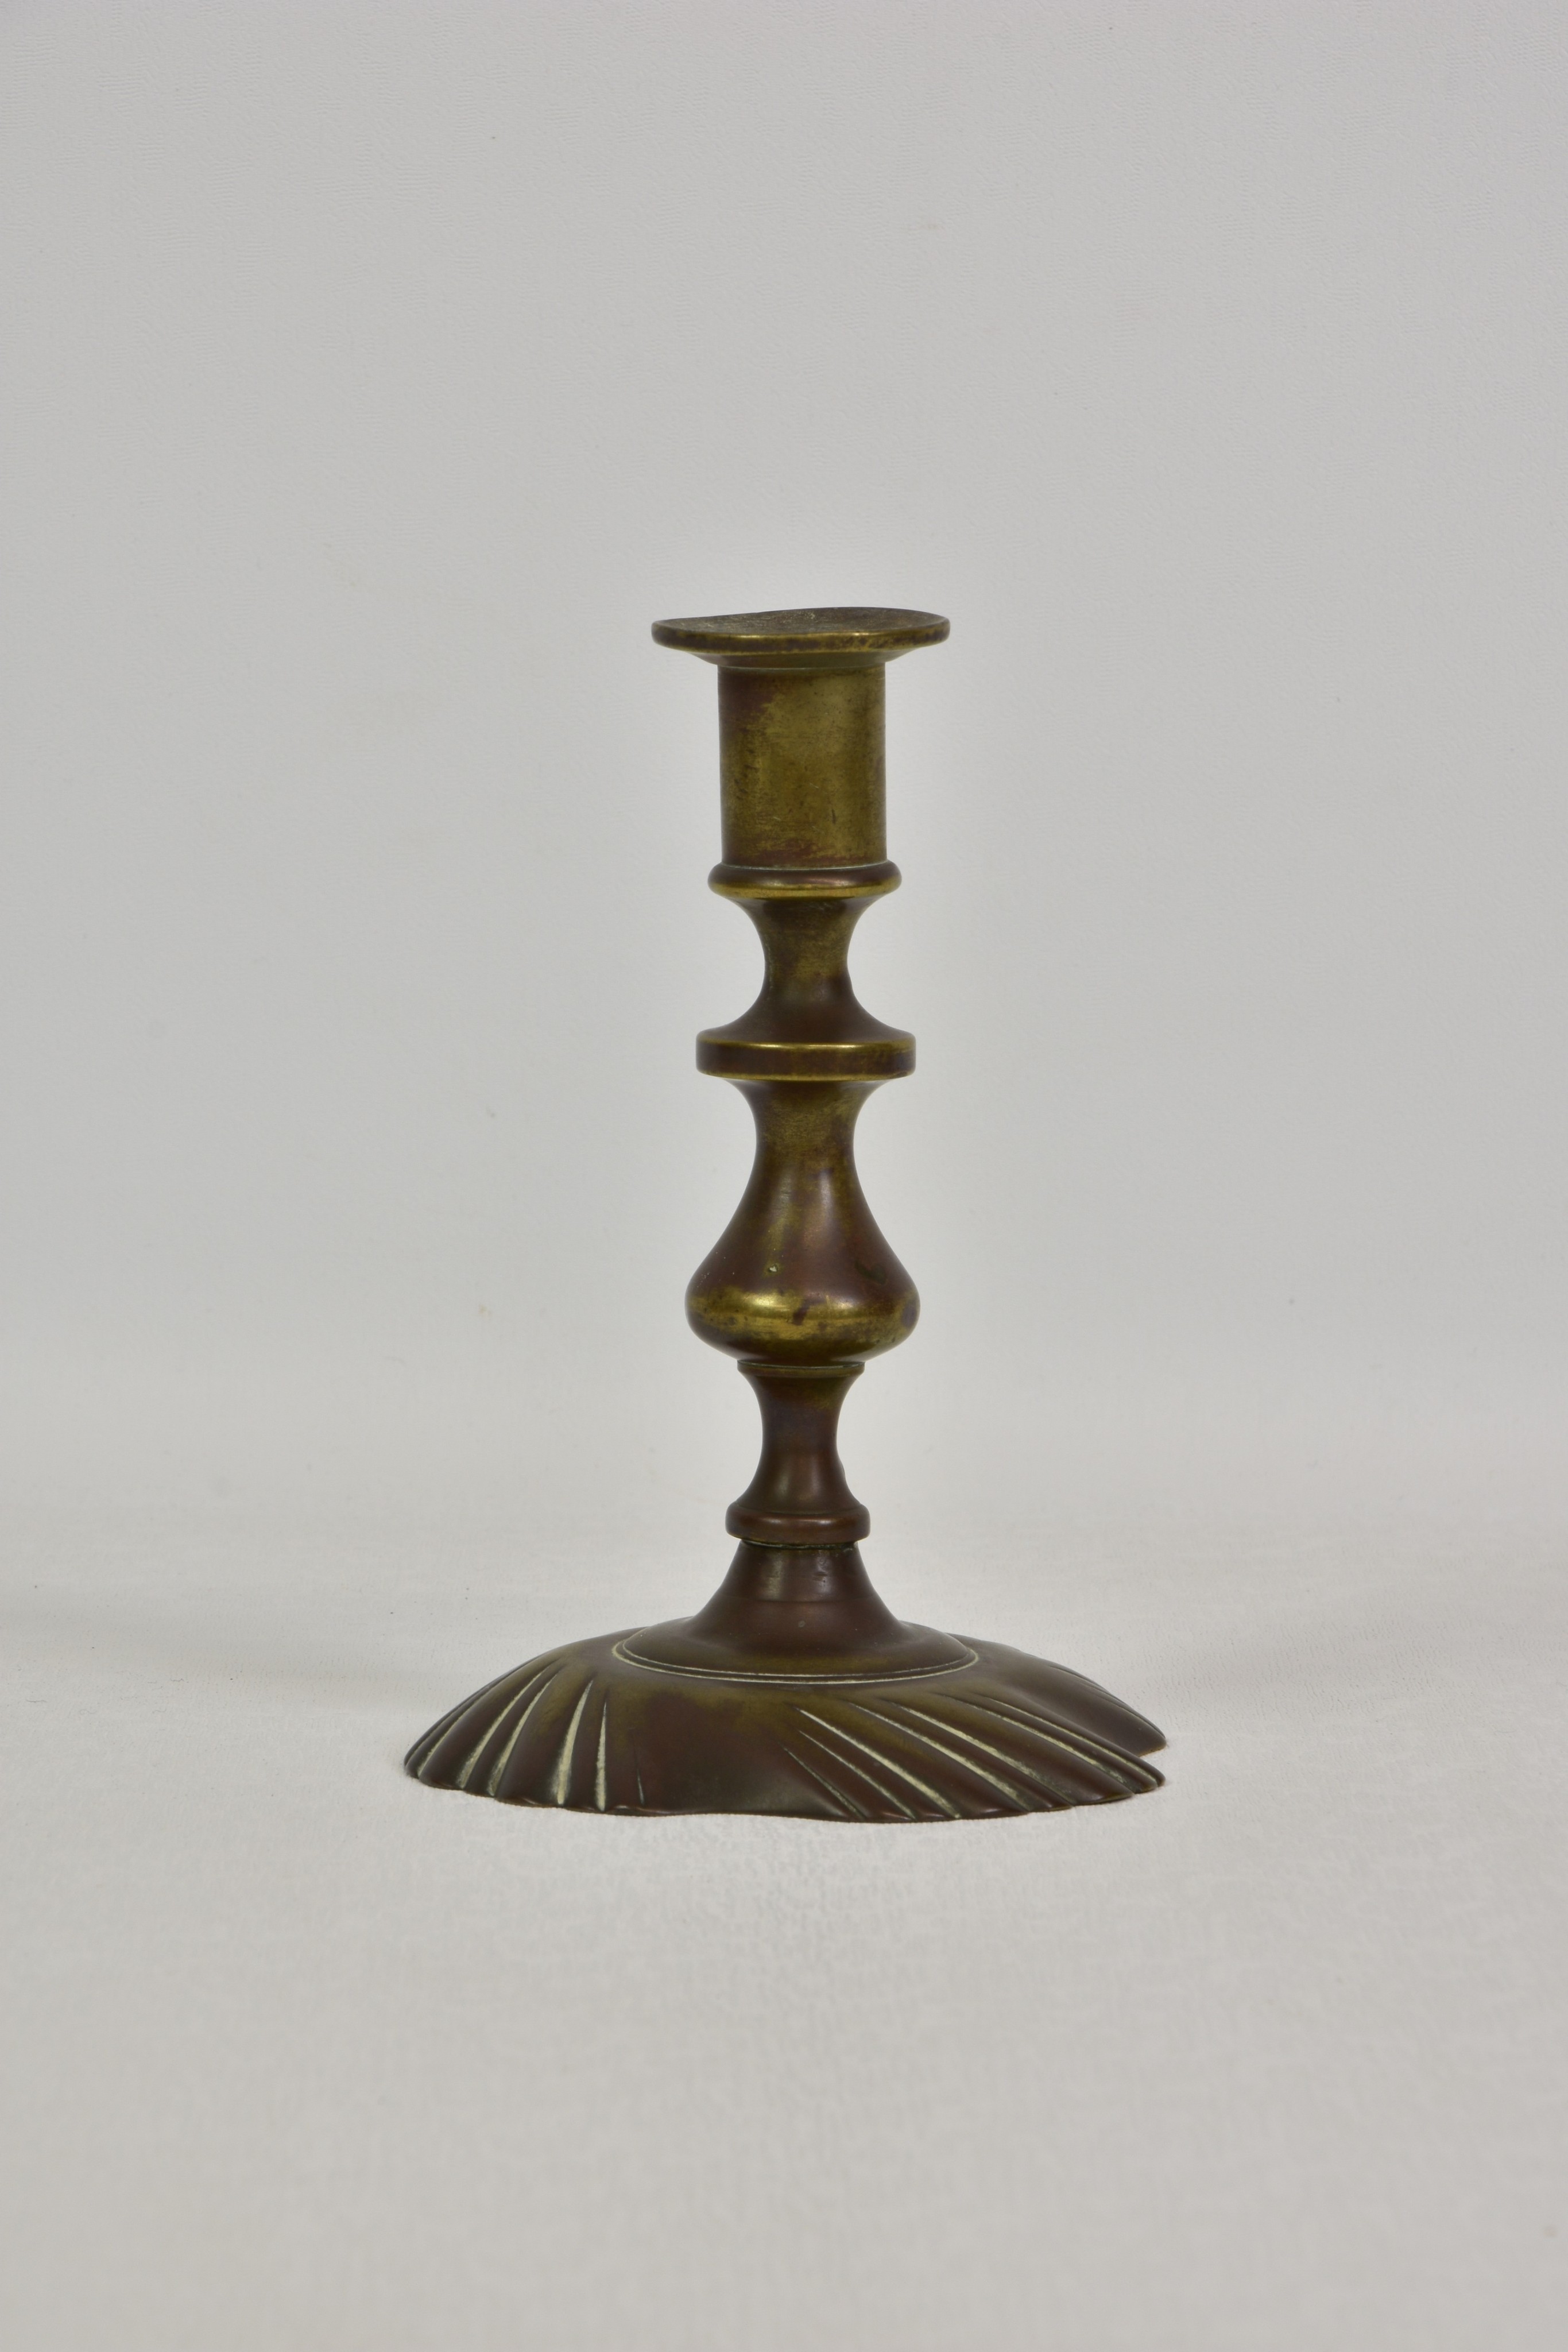 An early to mid 18th century brass candlestick, on a knopped and baluster stem, with a shallow,